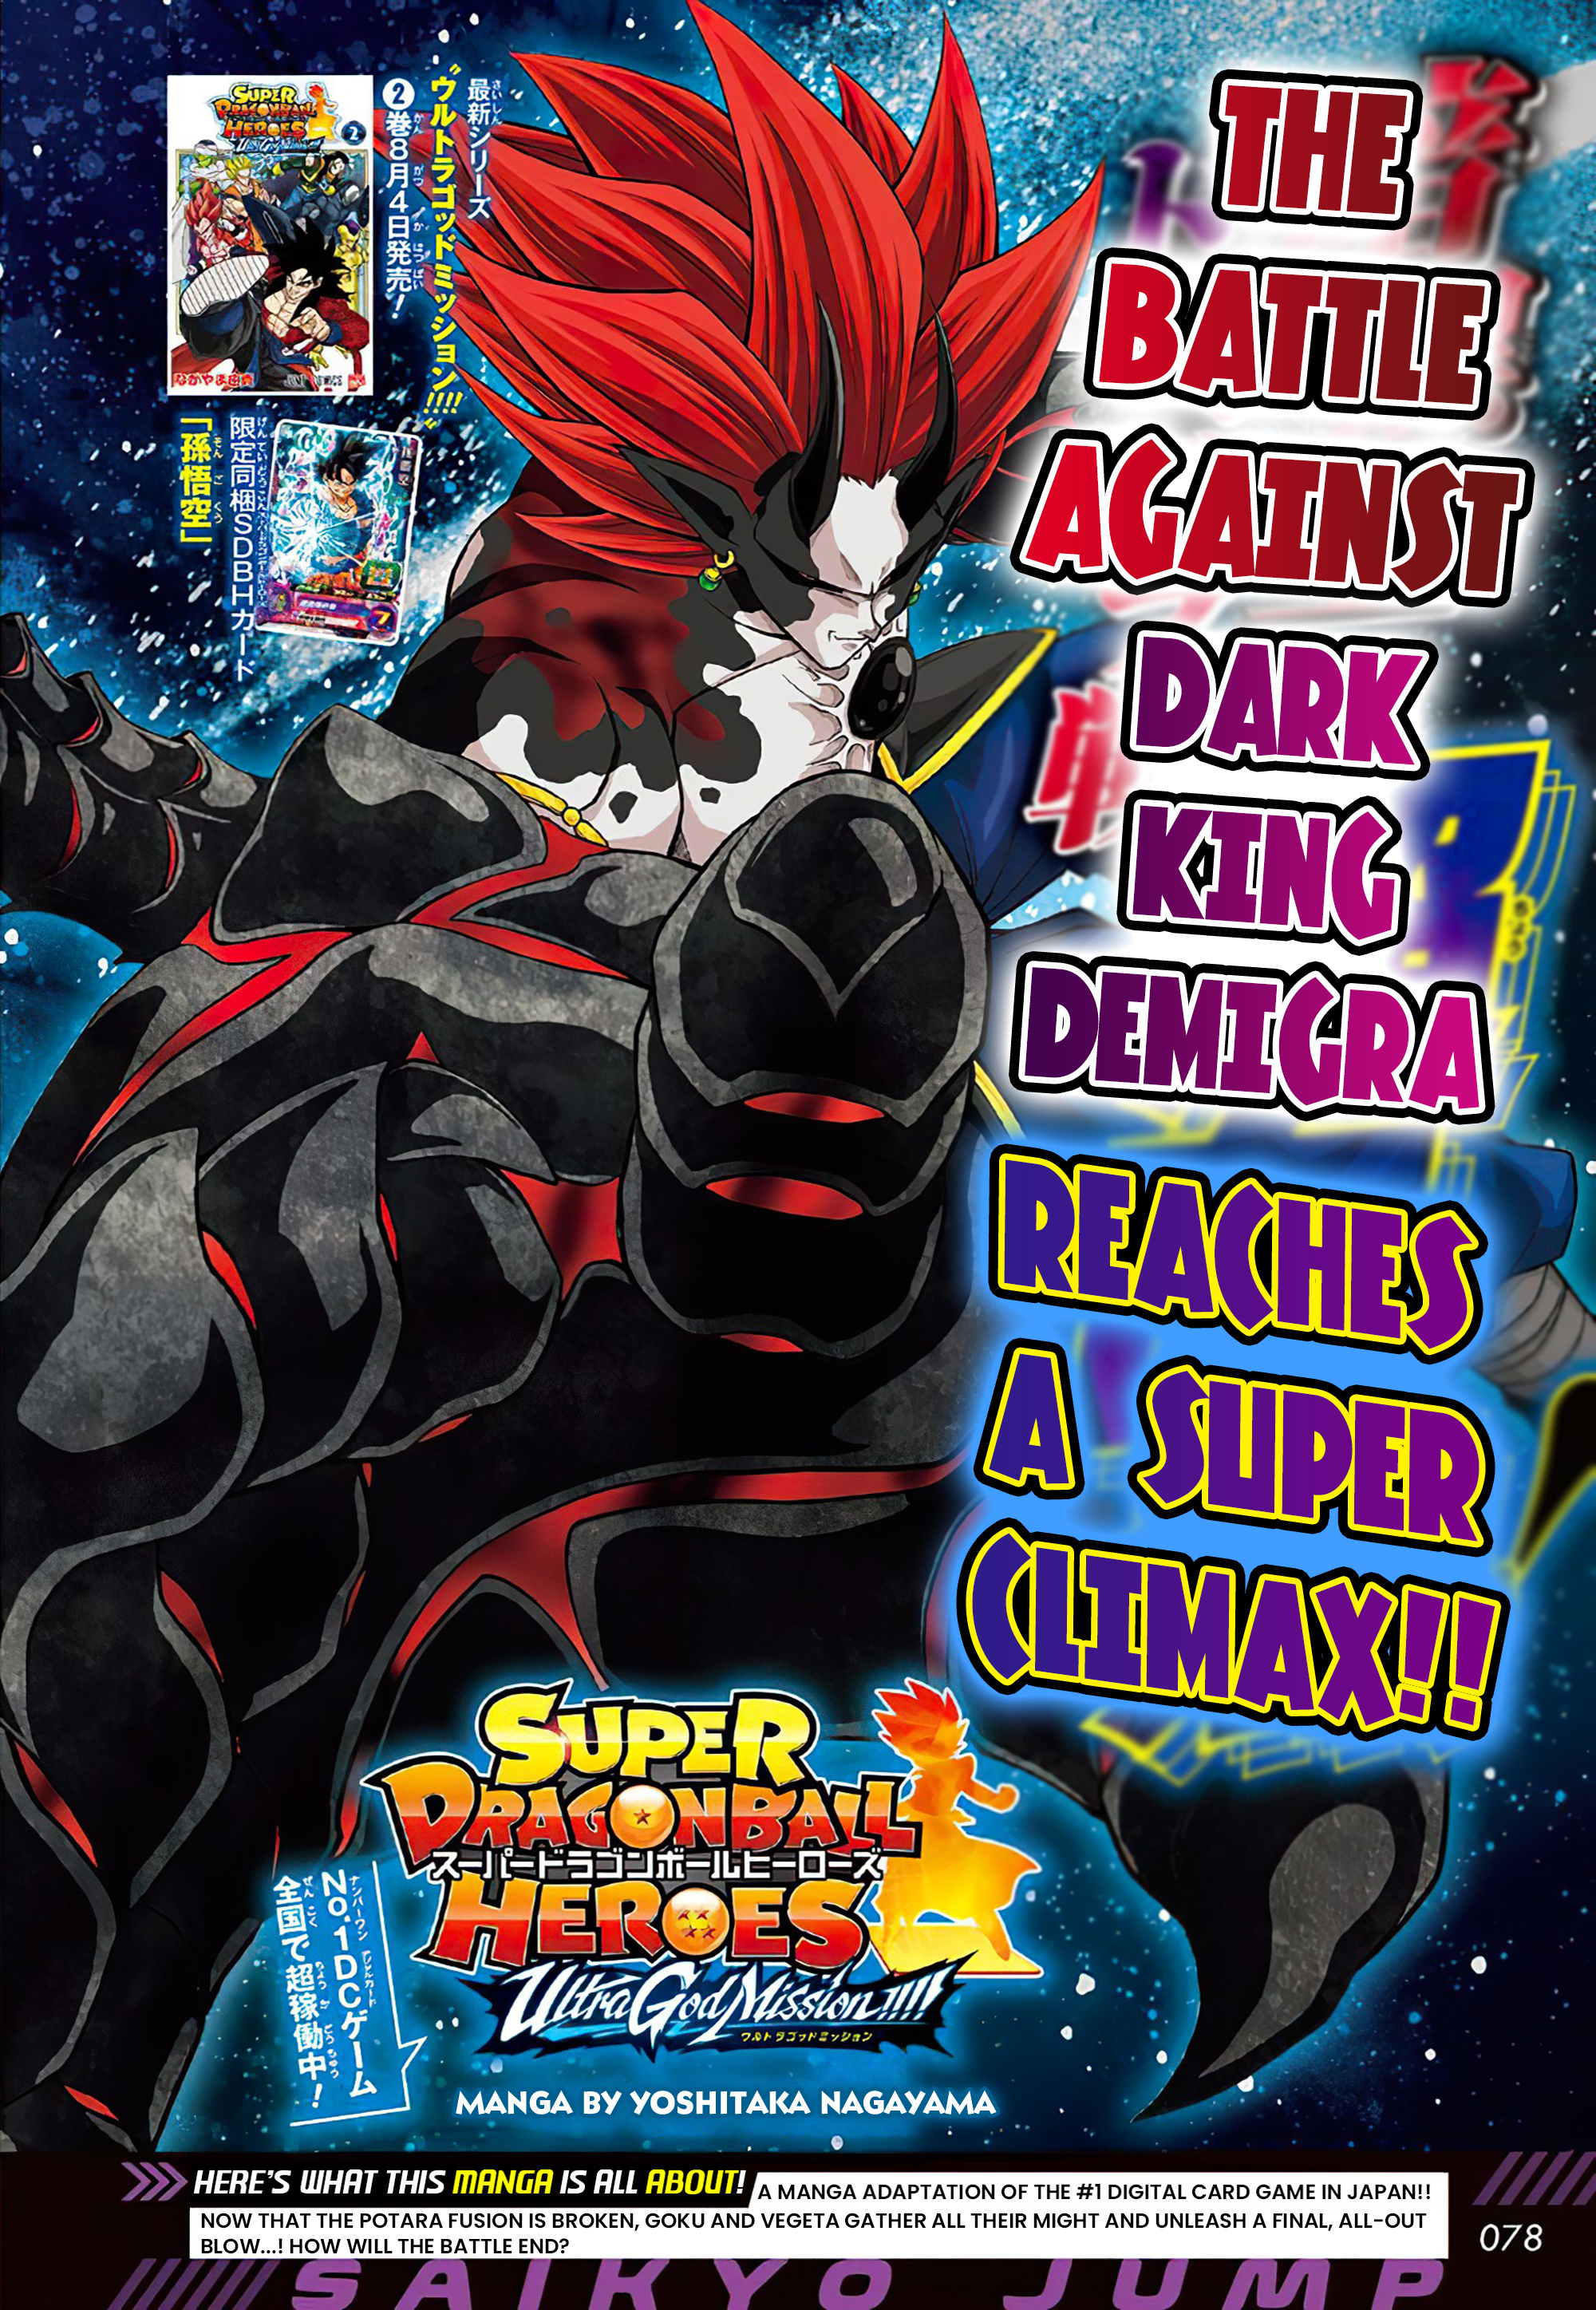 Super Dragon Ball Heroes: Ultra God Mission!!!! Vol.4 Chapter 18: The Battle Against Dark King Demigra Reaches A Super Climax!! - Picture 1